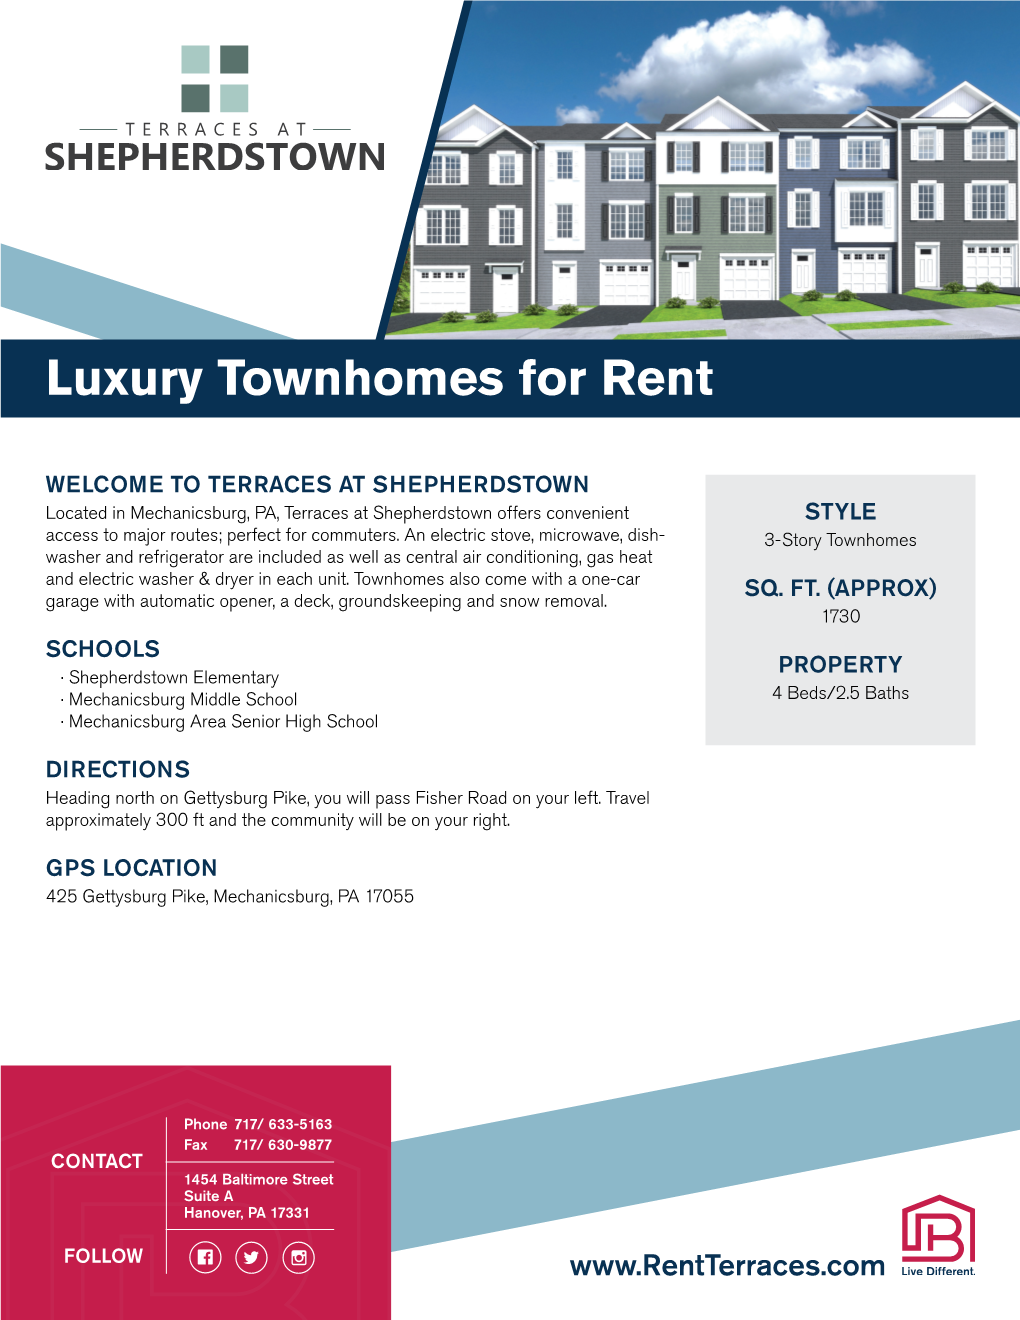 Luxury Townhomes for Rent